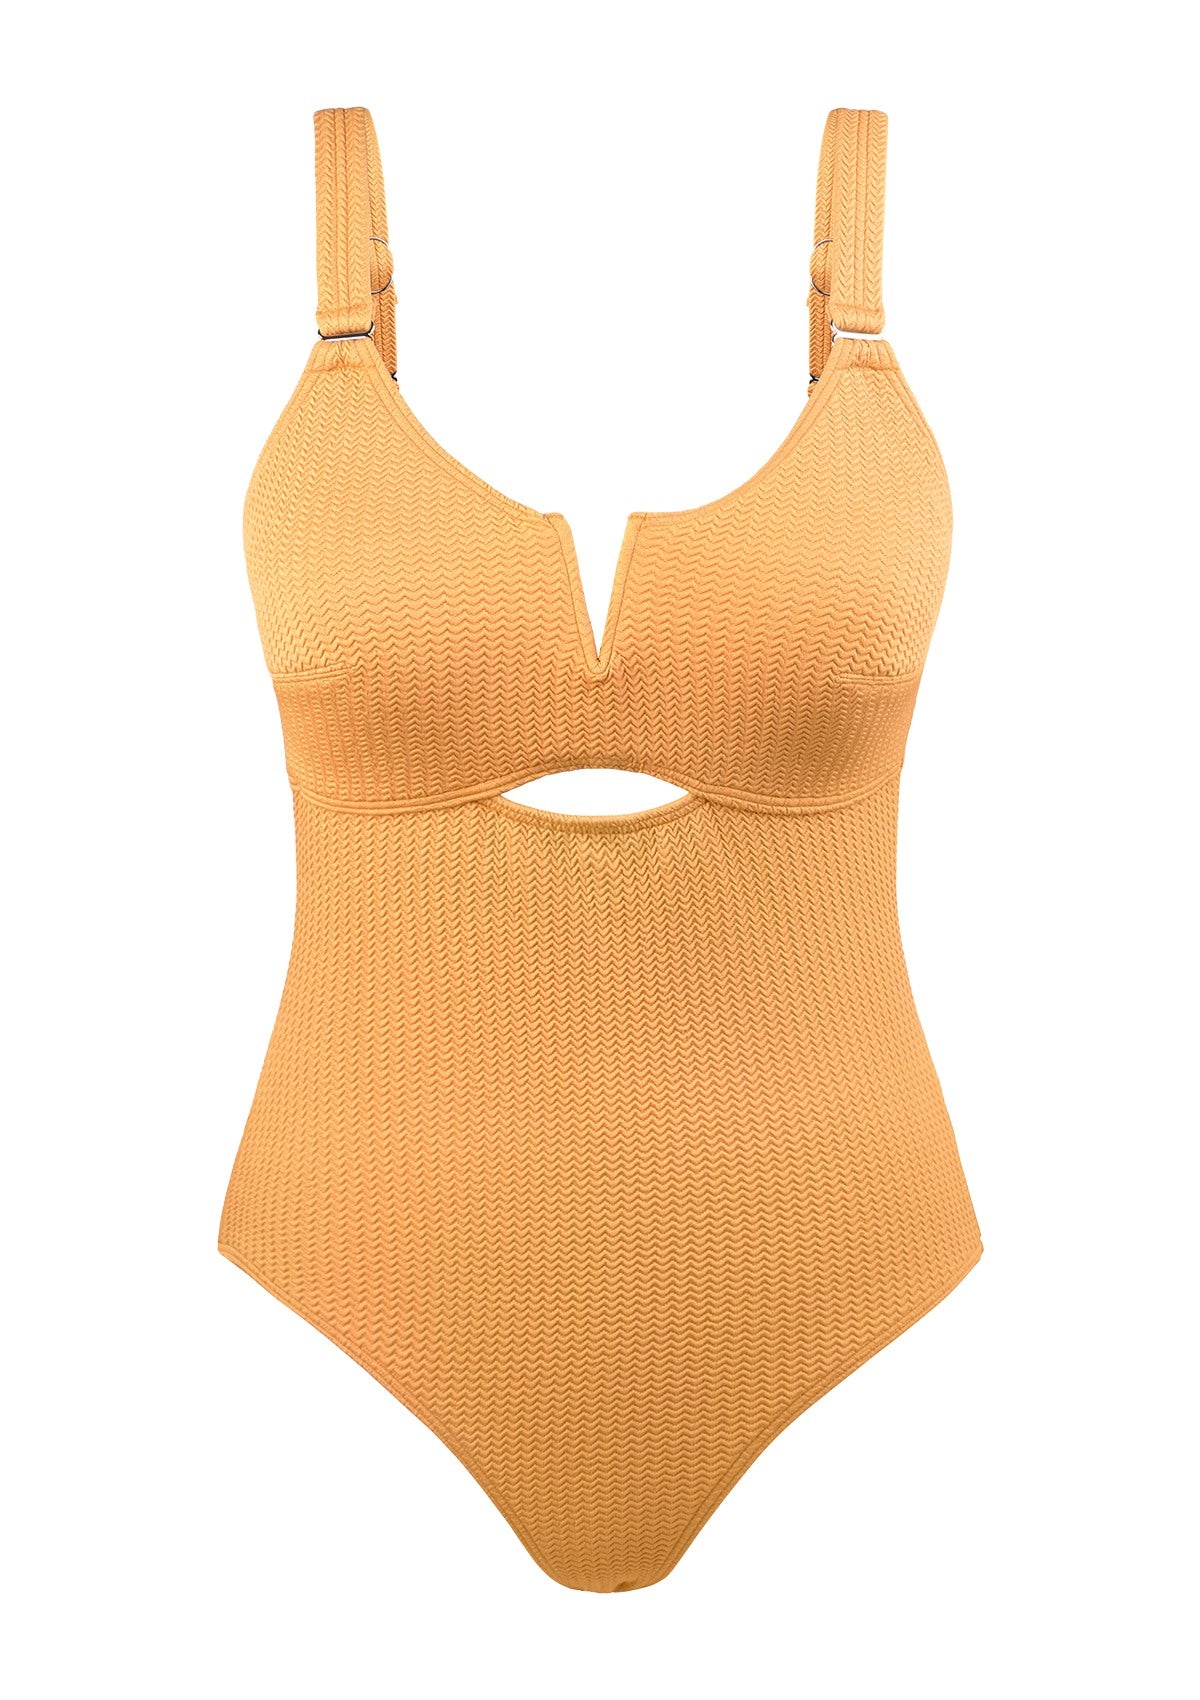 V-wire Plunge Textured One-piece Cutout Swimsuit - 4XL / Peachy Sunrise